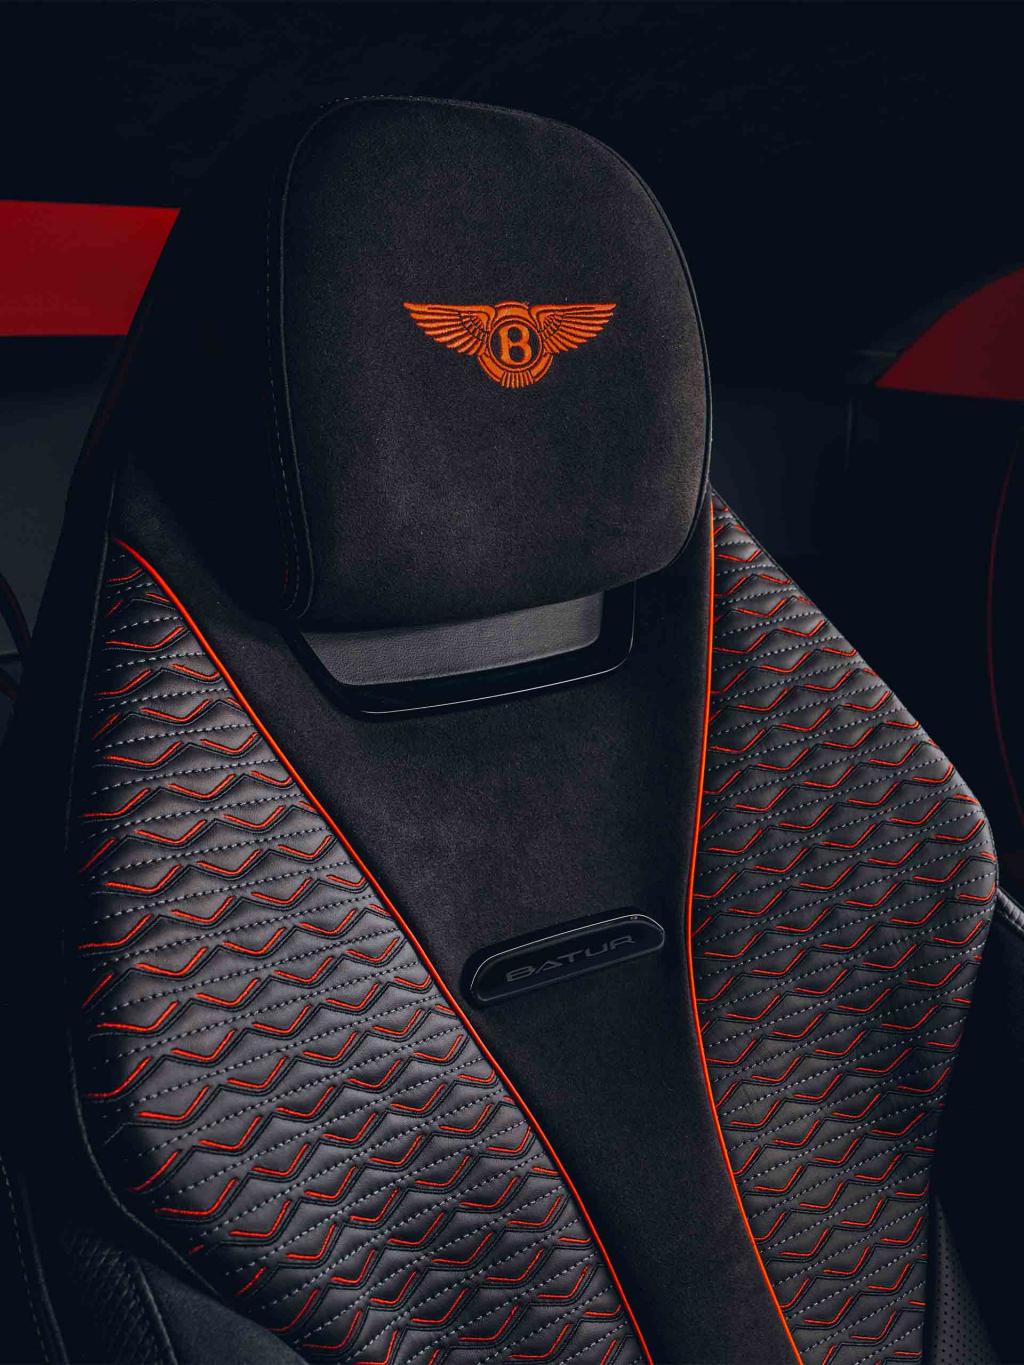 Close up view of Bentley Batur's seat in duo tone Beluga and Hotspur hide with contrast piping and Bentley wings emblem to head rest